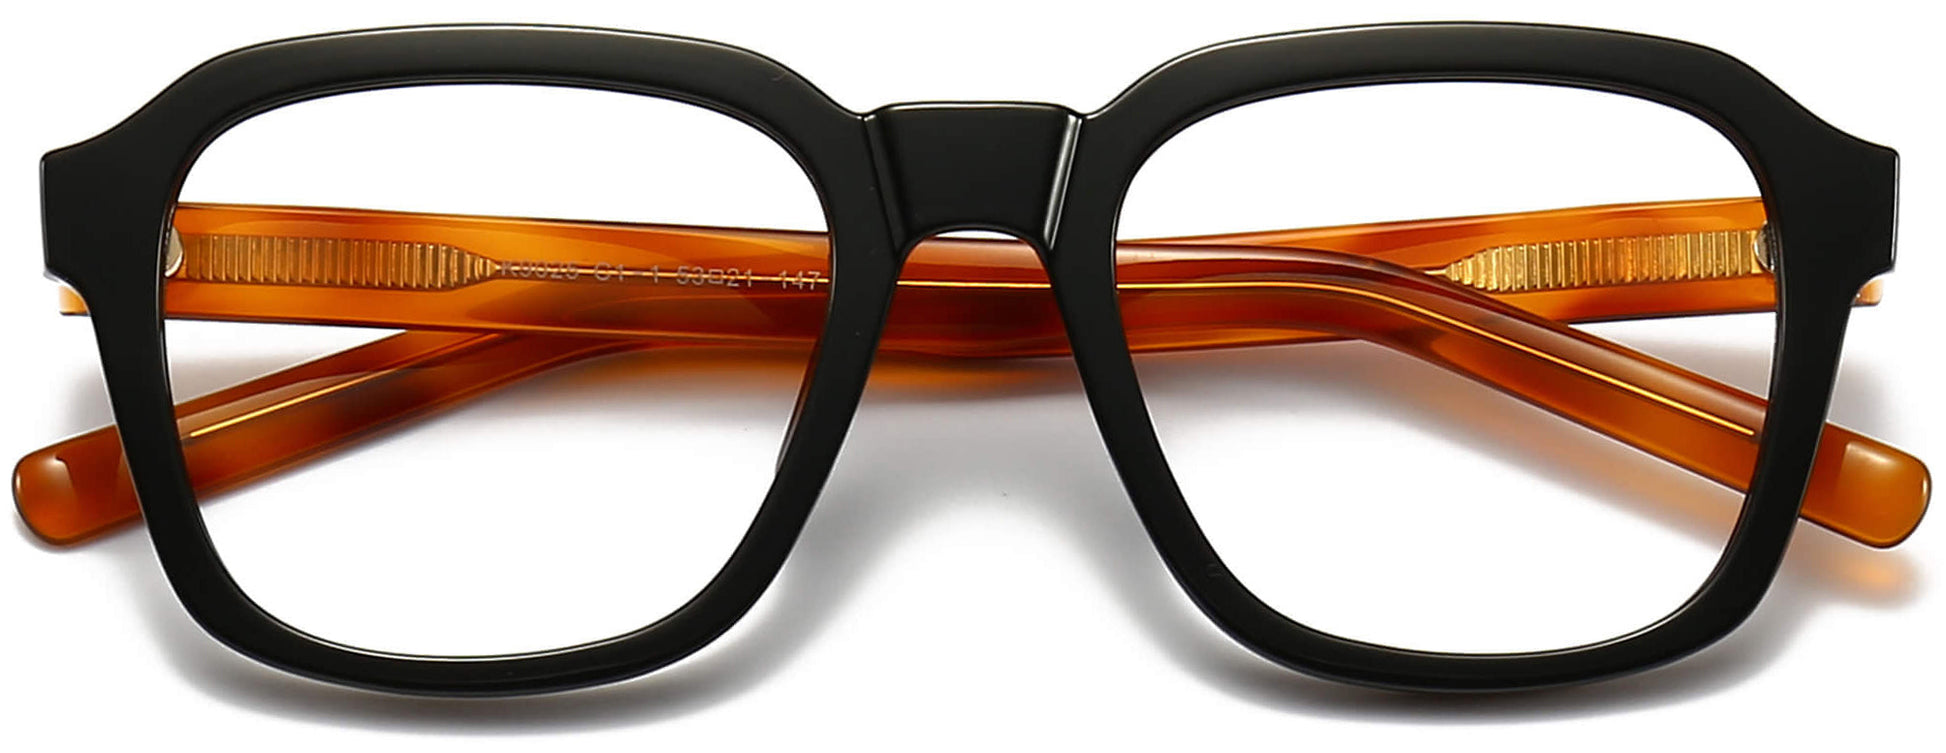 Donald Square Black Eyeglasses from ANRRI, closed view